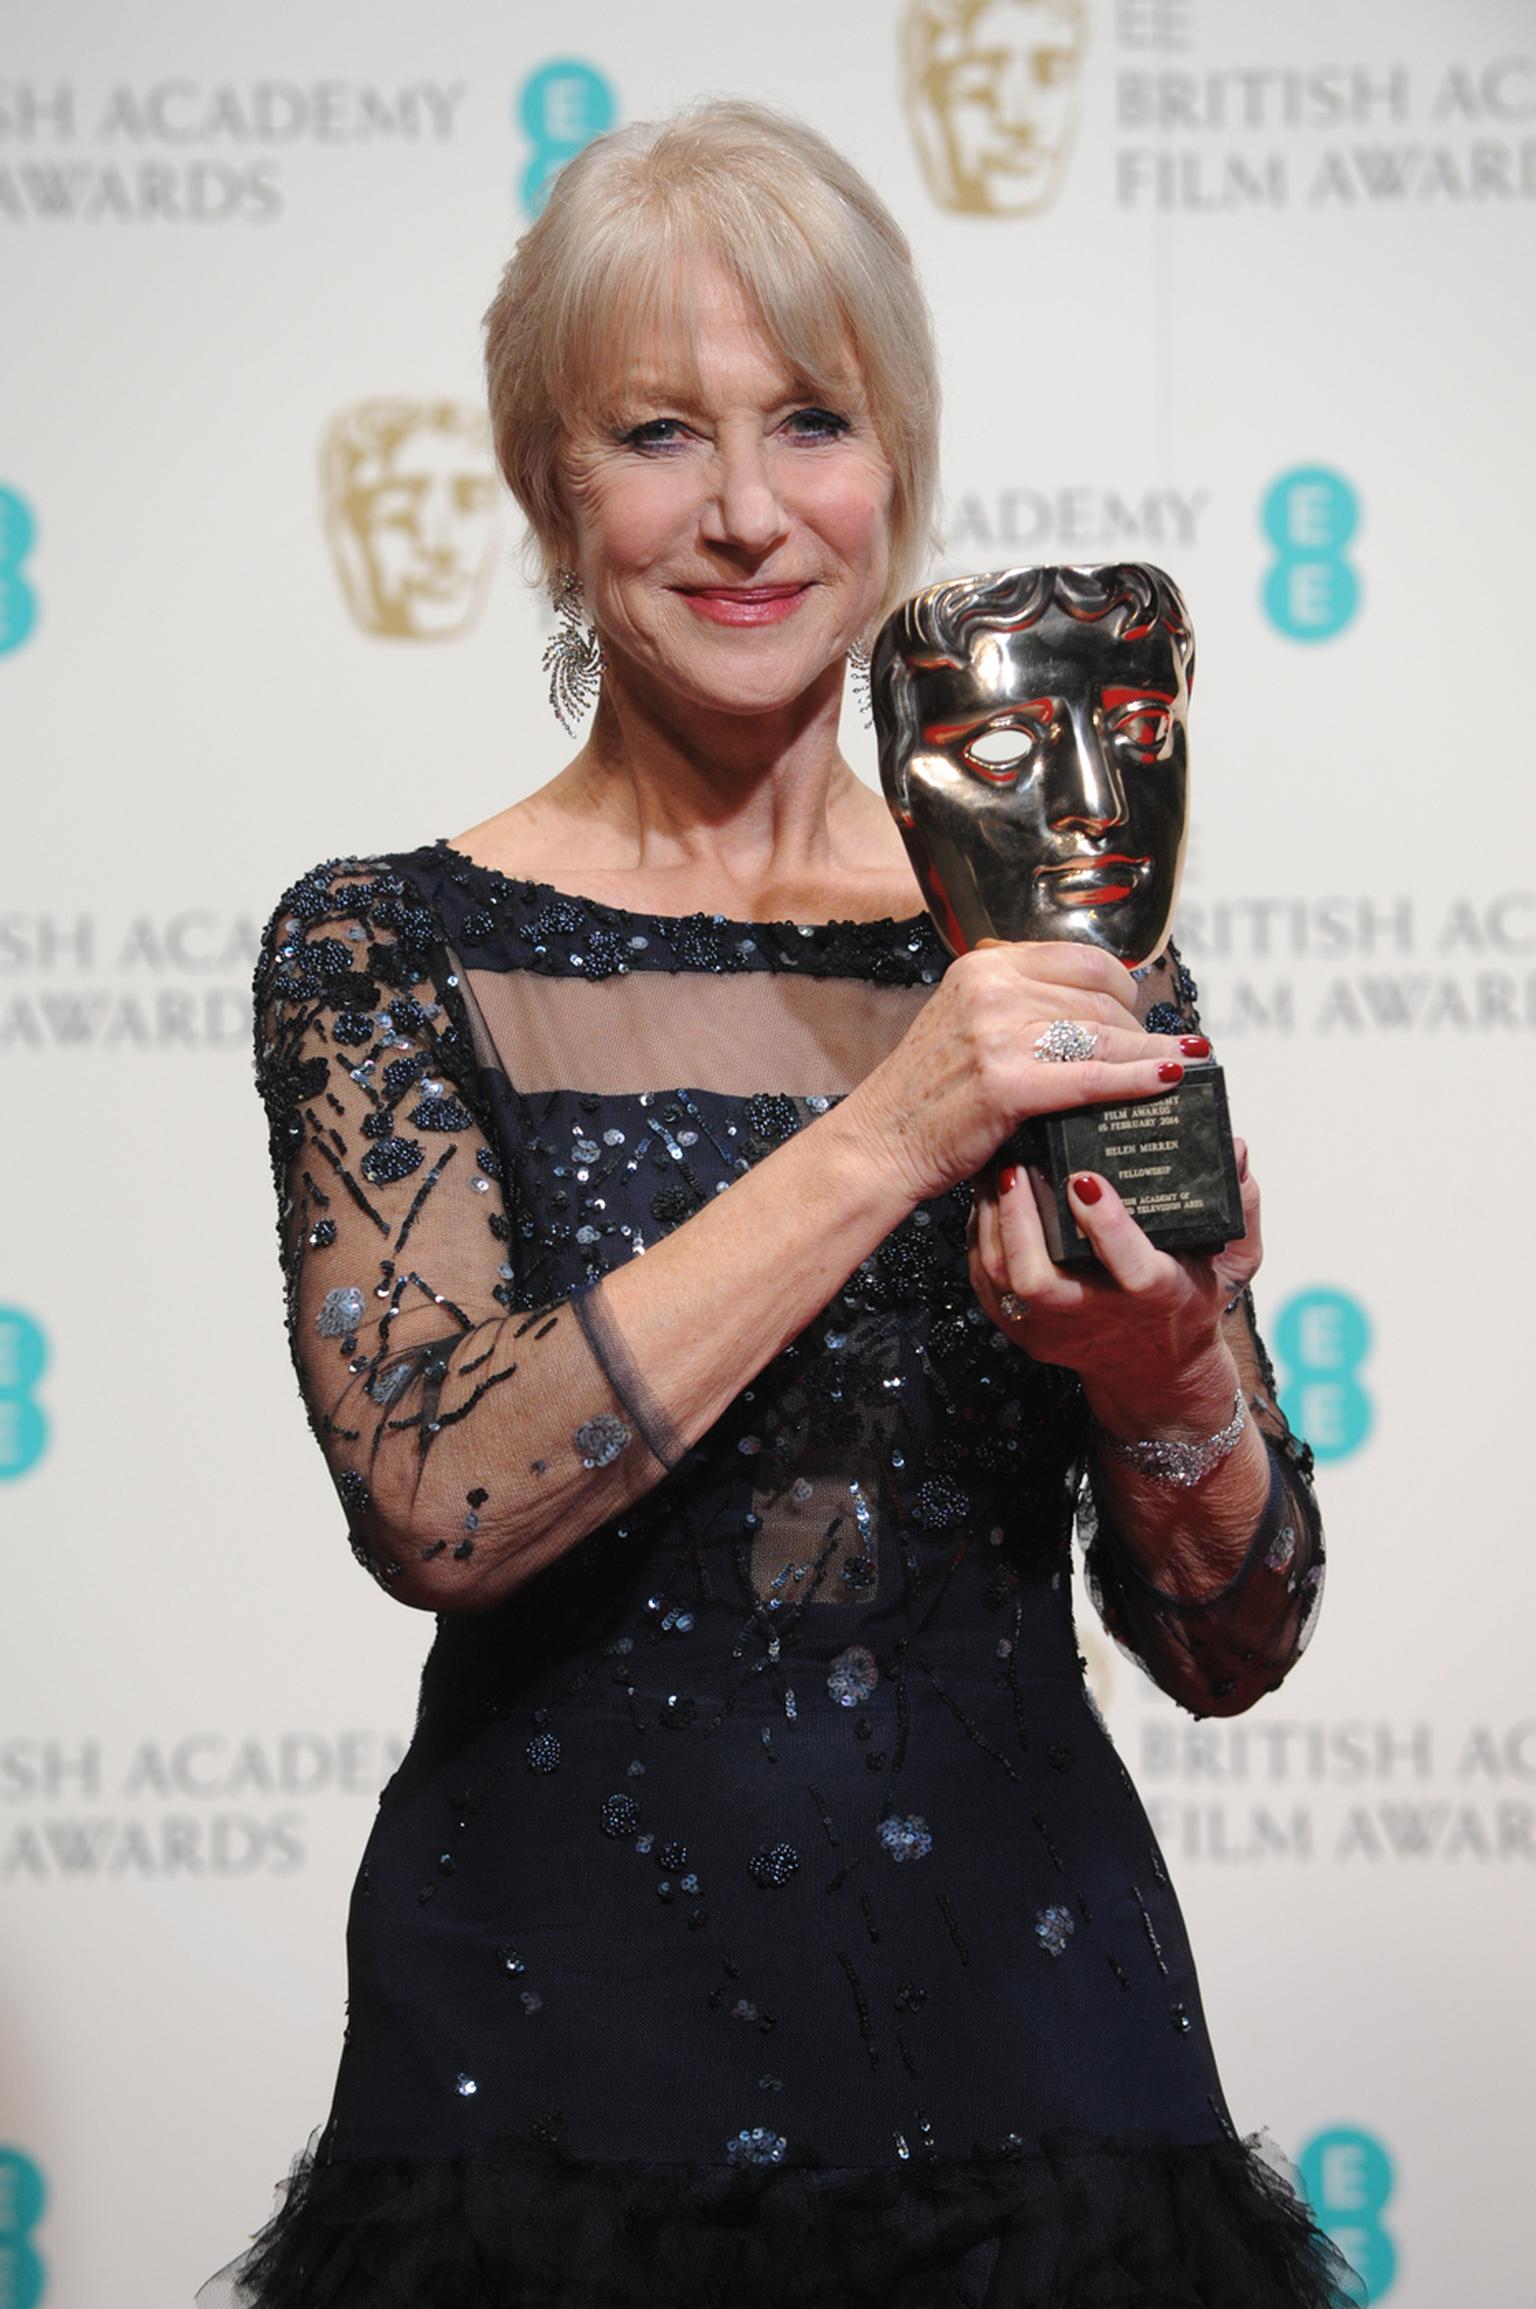 Helen Mirren collects her BAFTA Academy Fellowship Award wearing the earrings, ring and cuff from Asprey's new Storm suite of jewels